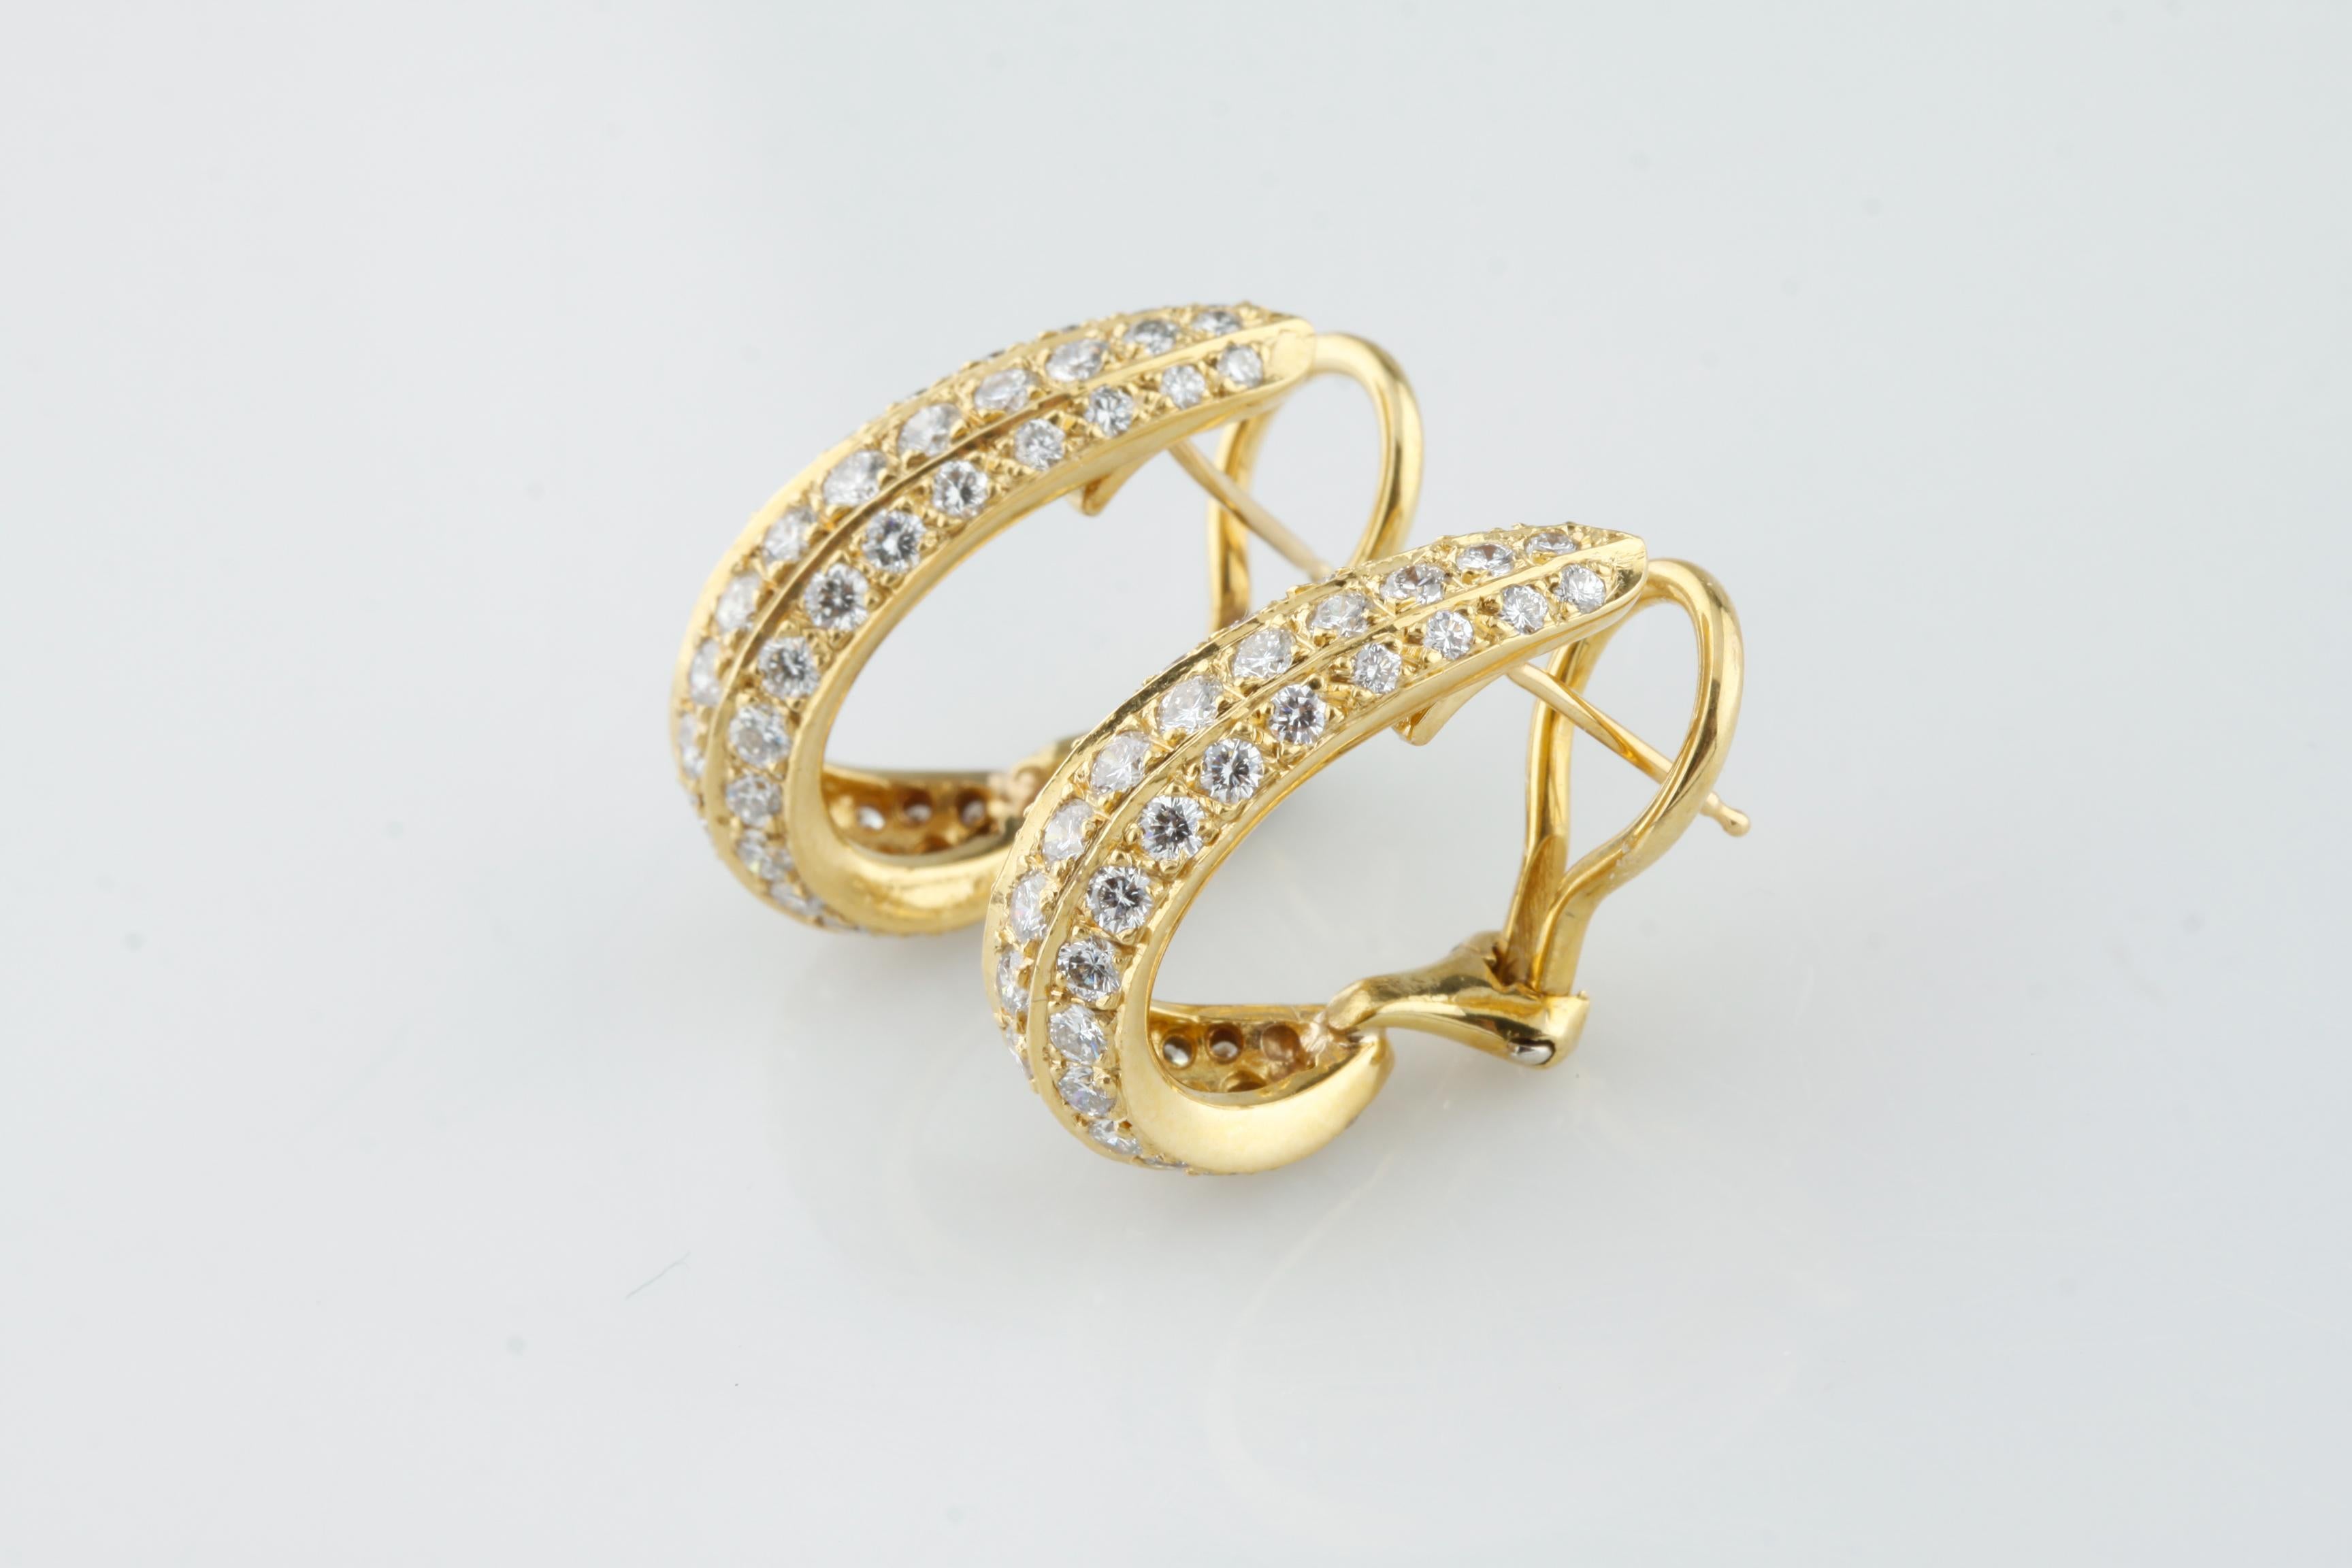 Gorgeous, Unique Gold Huggie Hoop Earrings
Feature Three Rows of Pave-Set Round Diamonds
Total # of Diamonds = 96
Total Carat Weight of Diamonds = Approximately 2.75 Ct
Average Color = F - G
Average Clarity = VS
Length of Drop = 22 mm
Width of